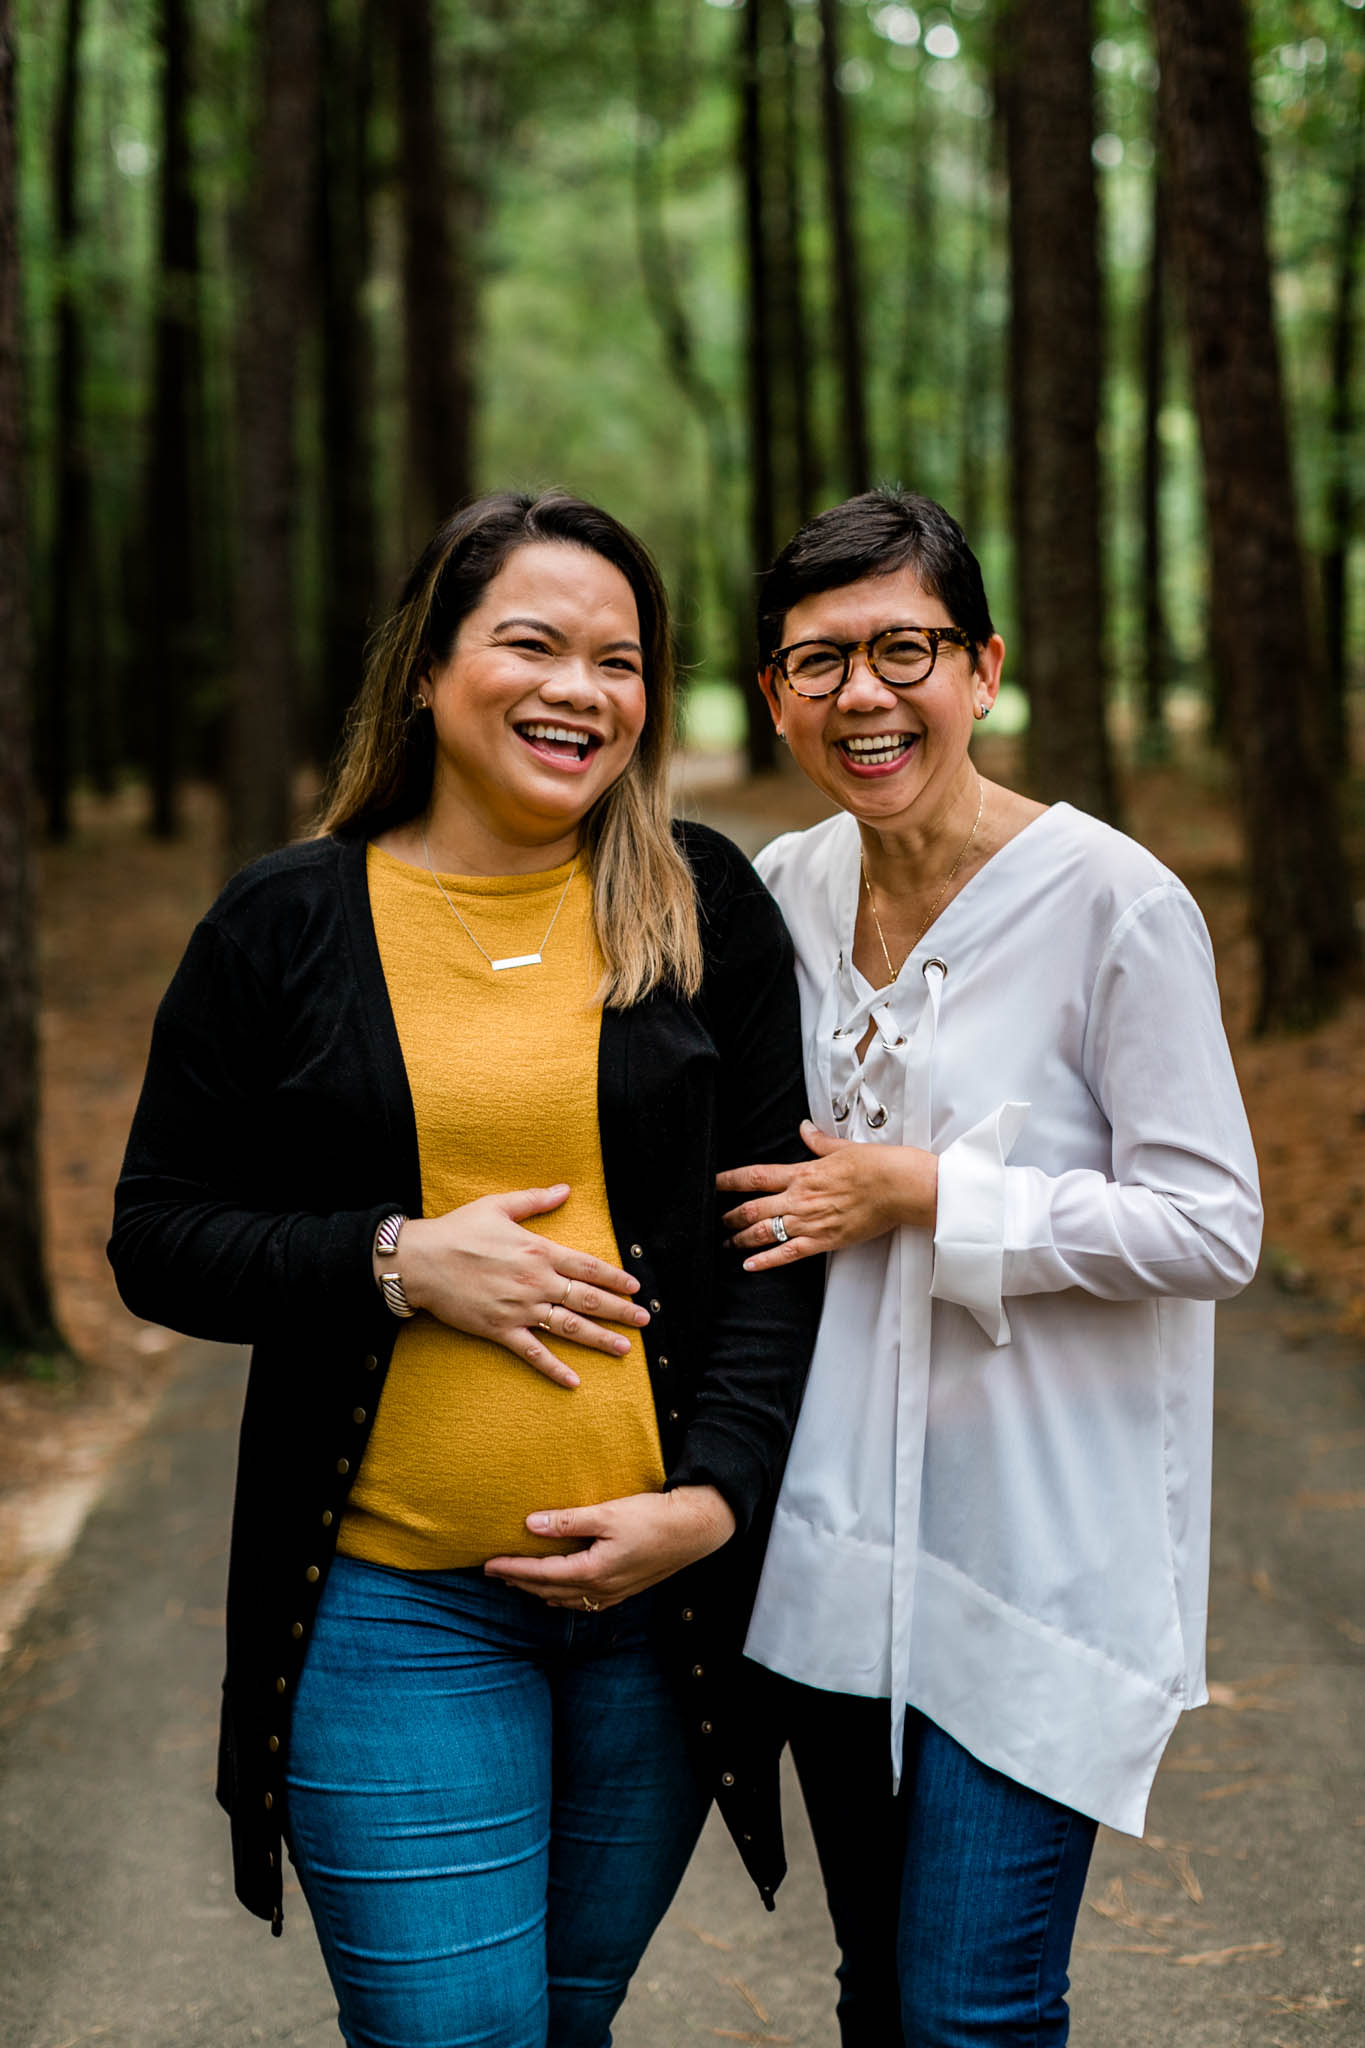 Mother and daughter maternity photographer | Raleigh Family Photographer | By G. Lin Photography | Umstead Park